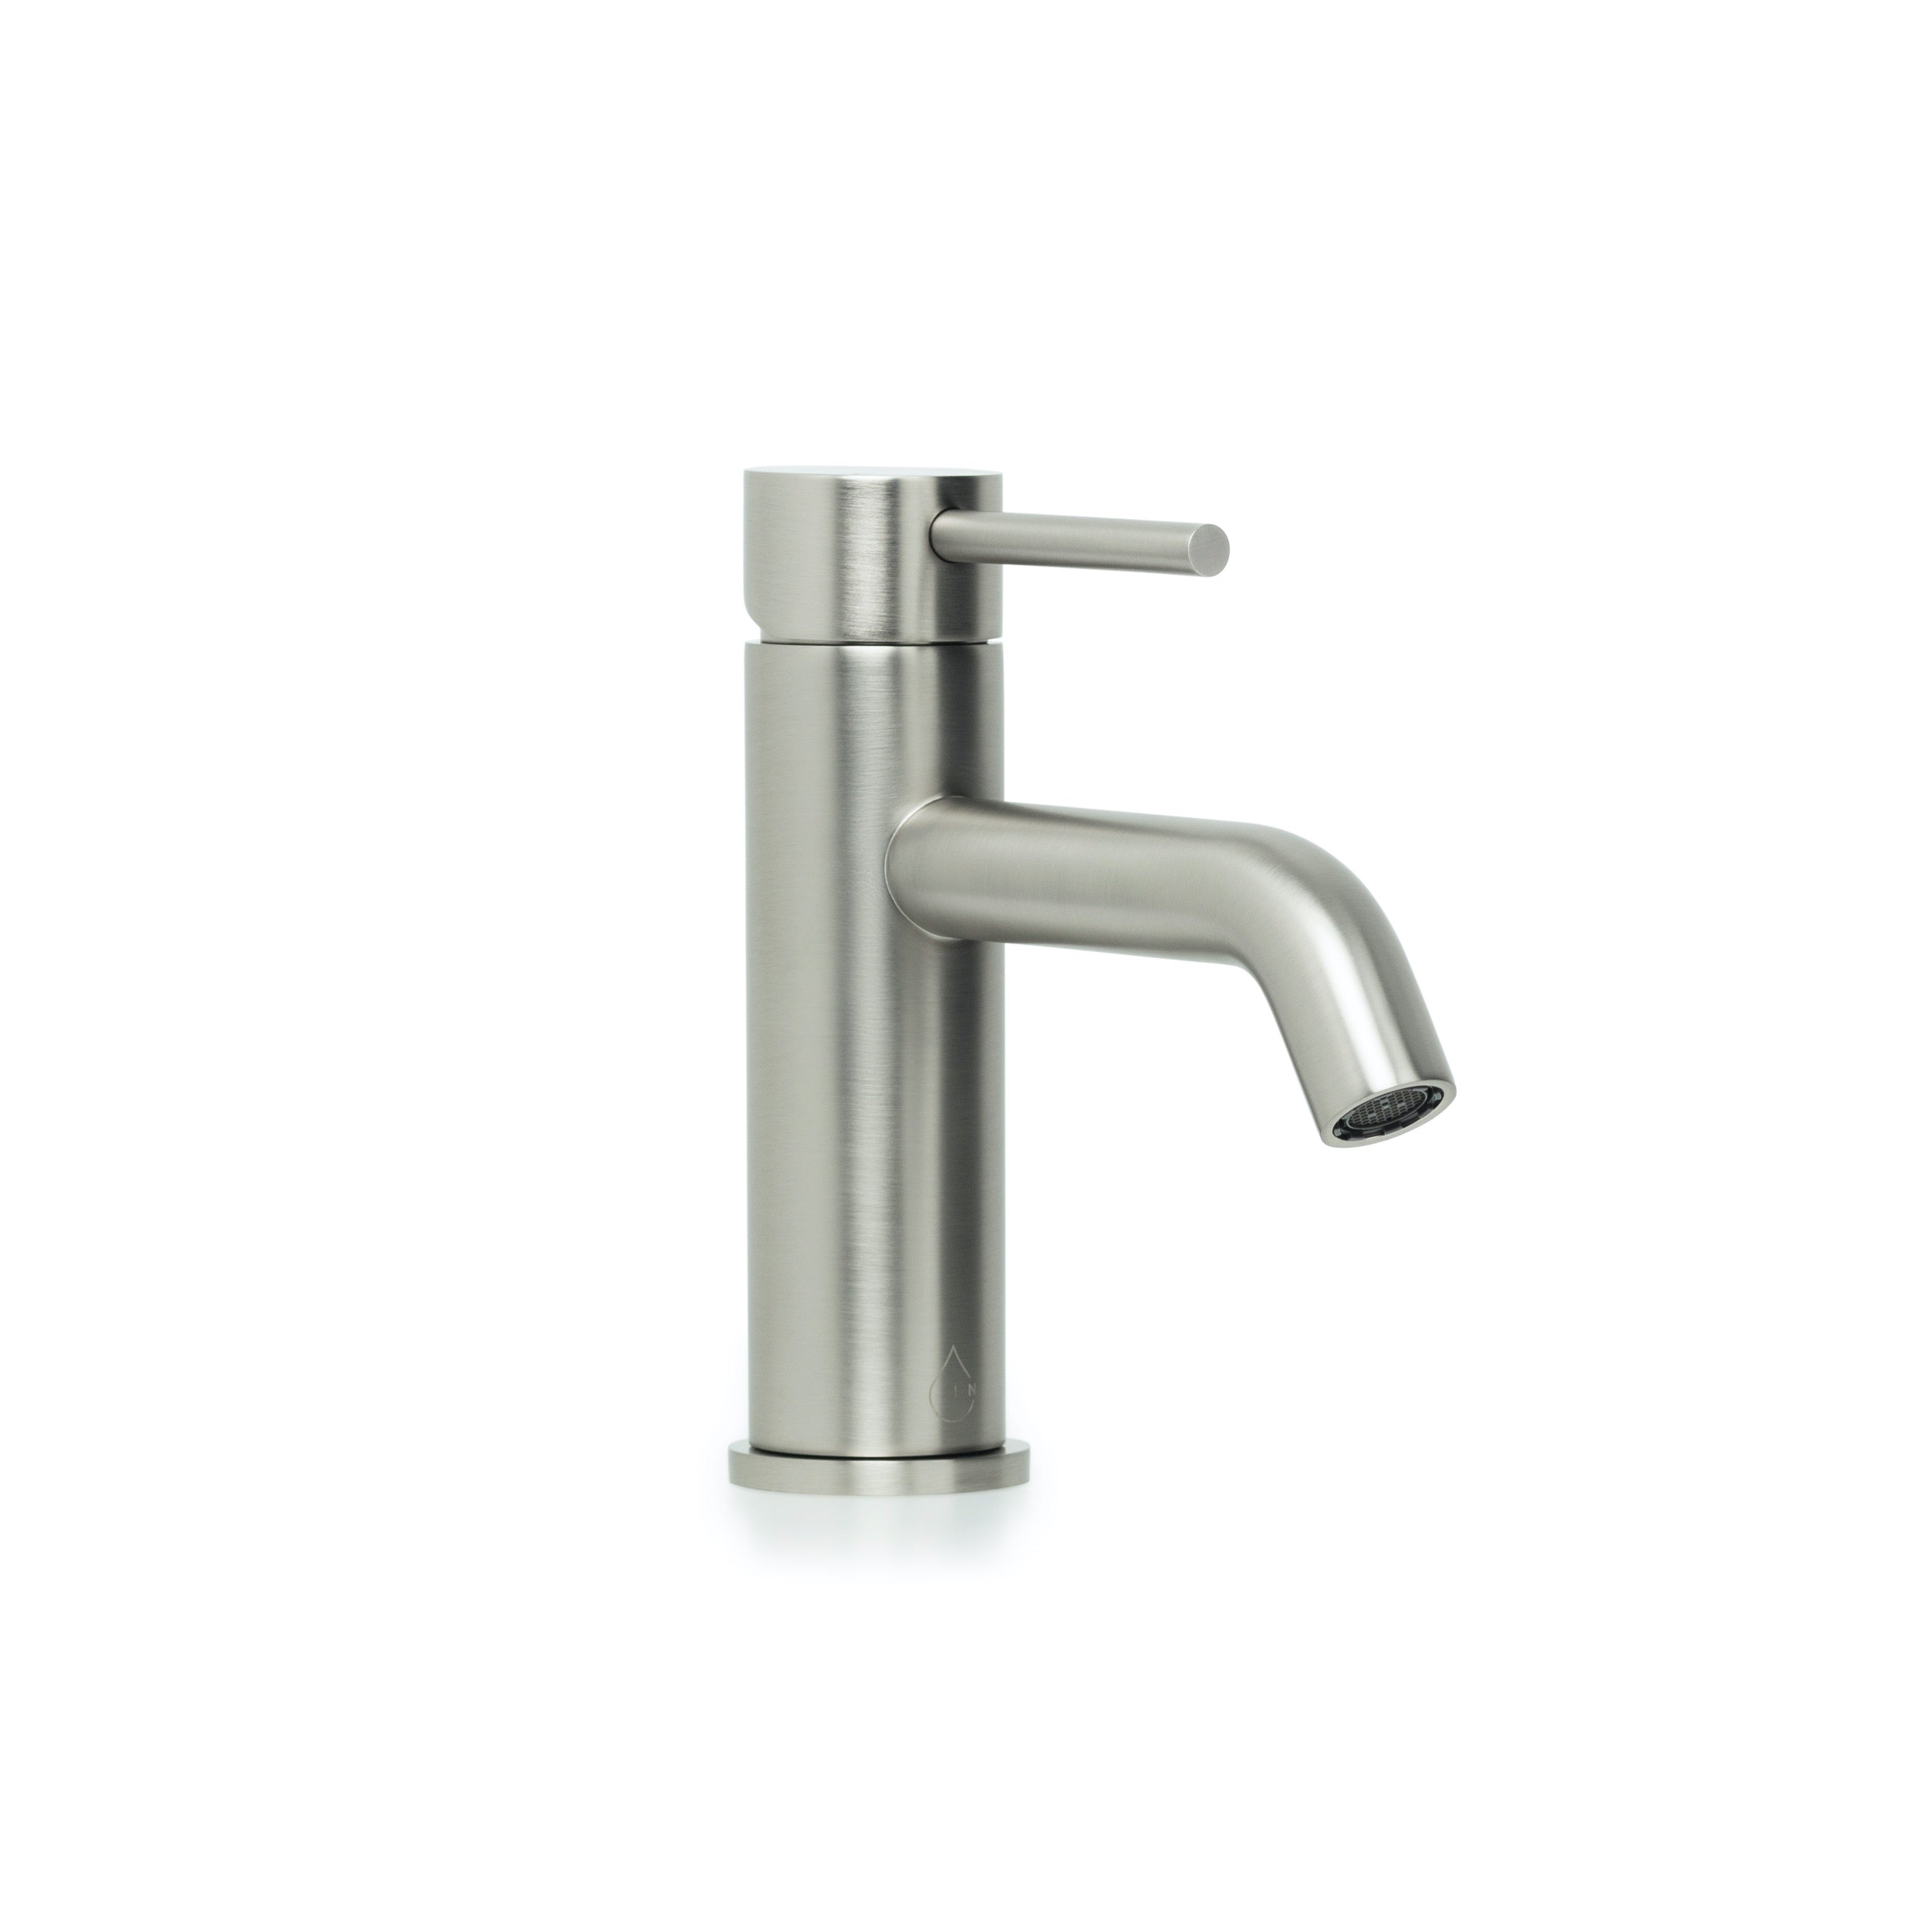 Bondi Pin Lever Basin Mixer with Curved Spout in Brushed Nickel